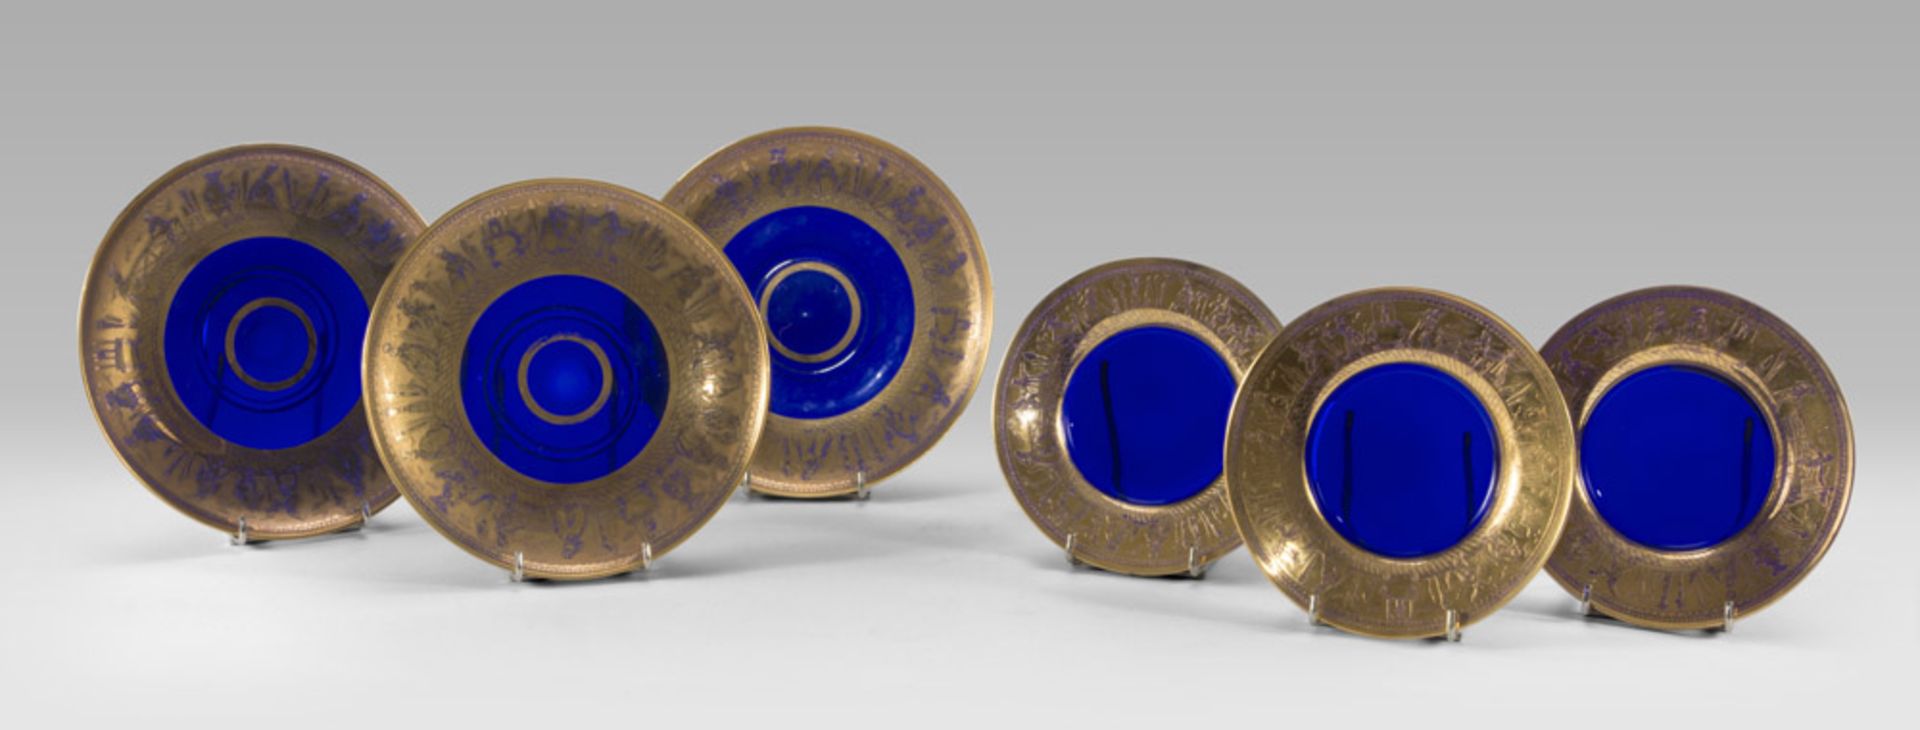 ELEVEN SAUCERS IN COBALT GLASS, VENICE EARLY 20TH CENTURY of three dimensions, with edge in gold